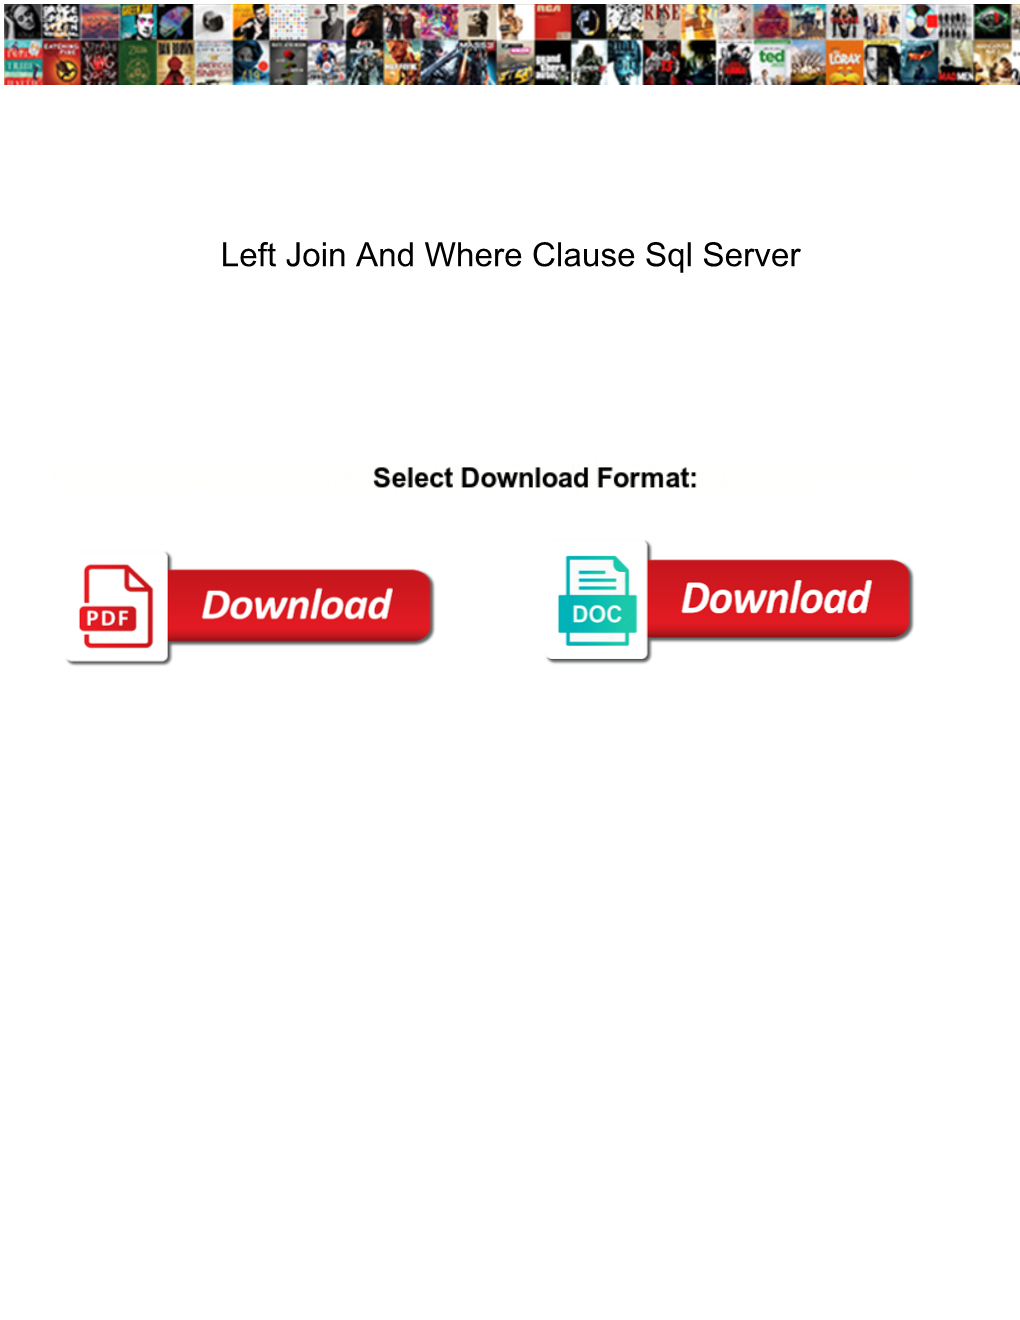 Left Join and Where Clause Sql Server